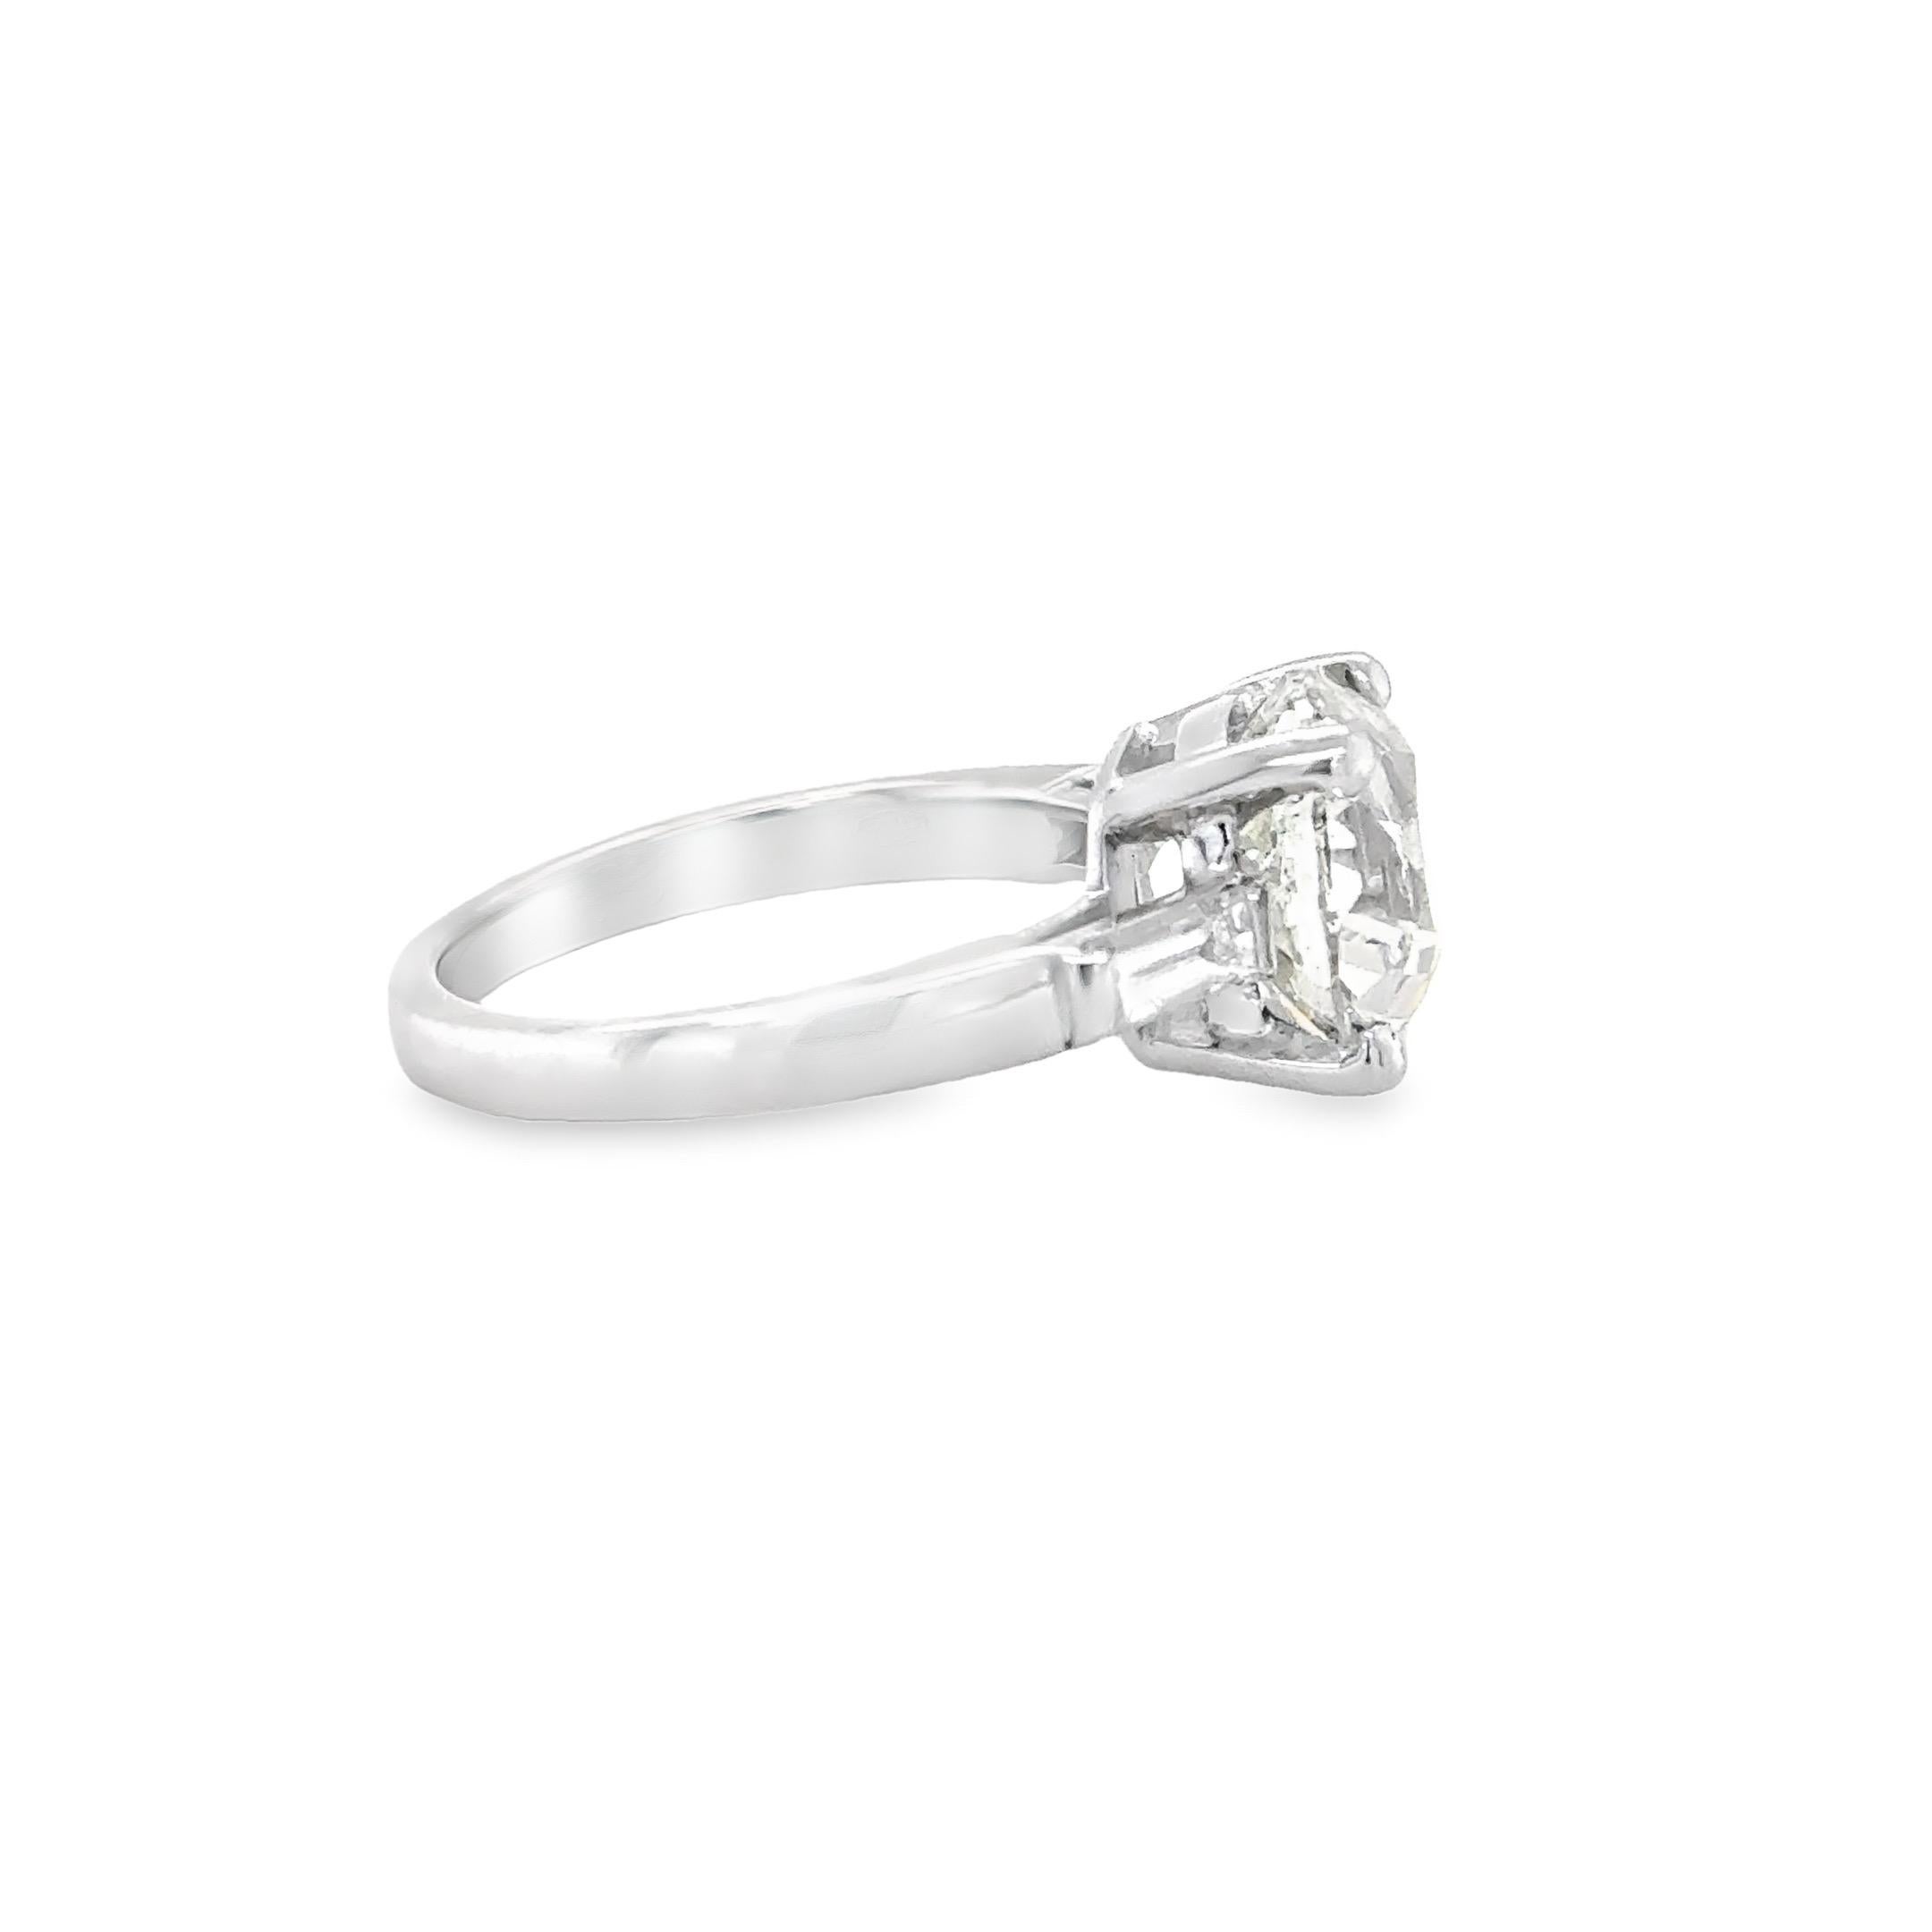 Women's or Men's 4.97 carats Old Mine Cut Natural Diamond Natural Diamonds On The Side For Sale